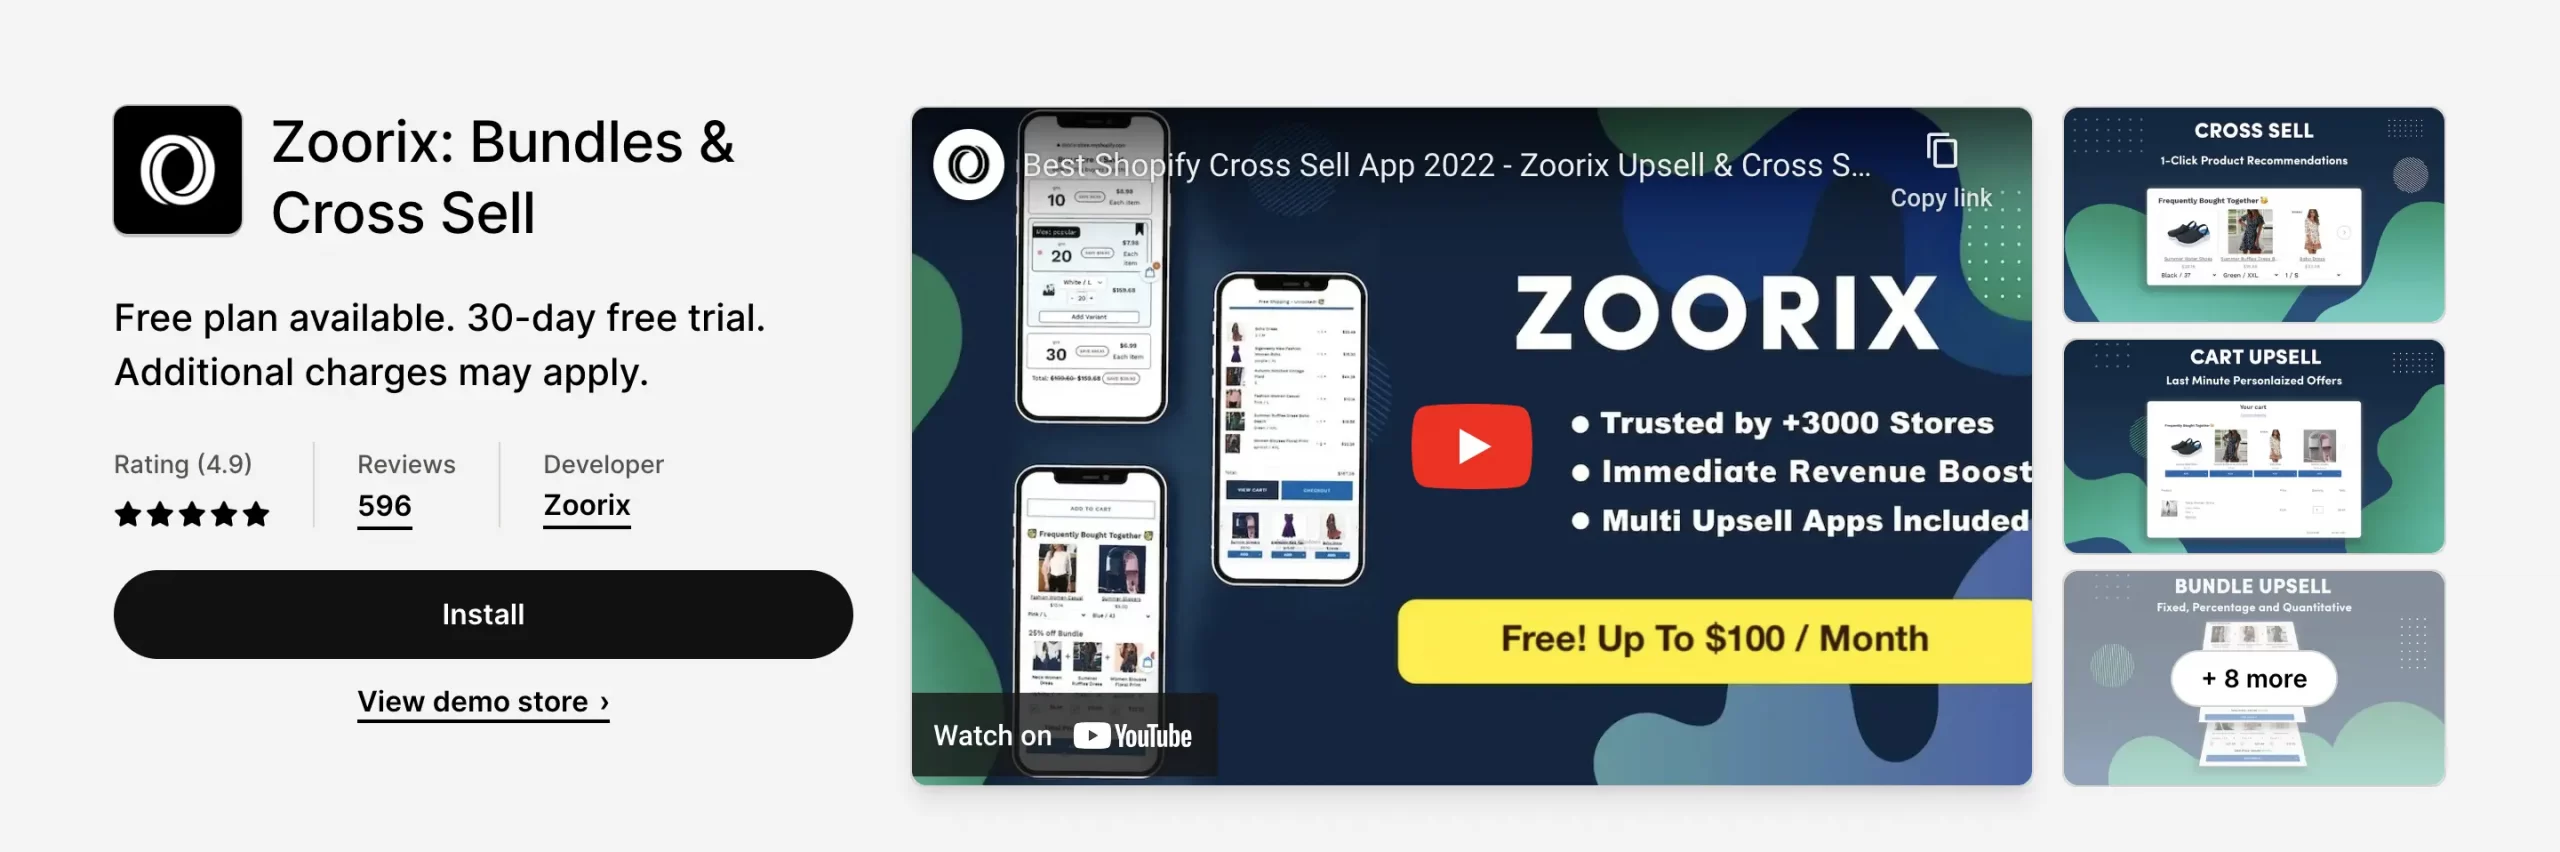 Zoorix allows you to boost sales with upsell bundles and bundle discounts.